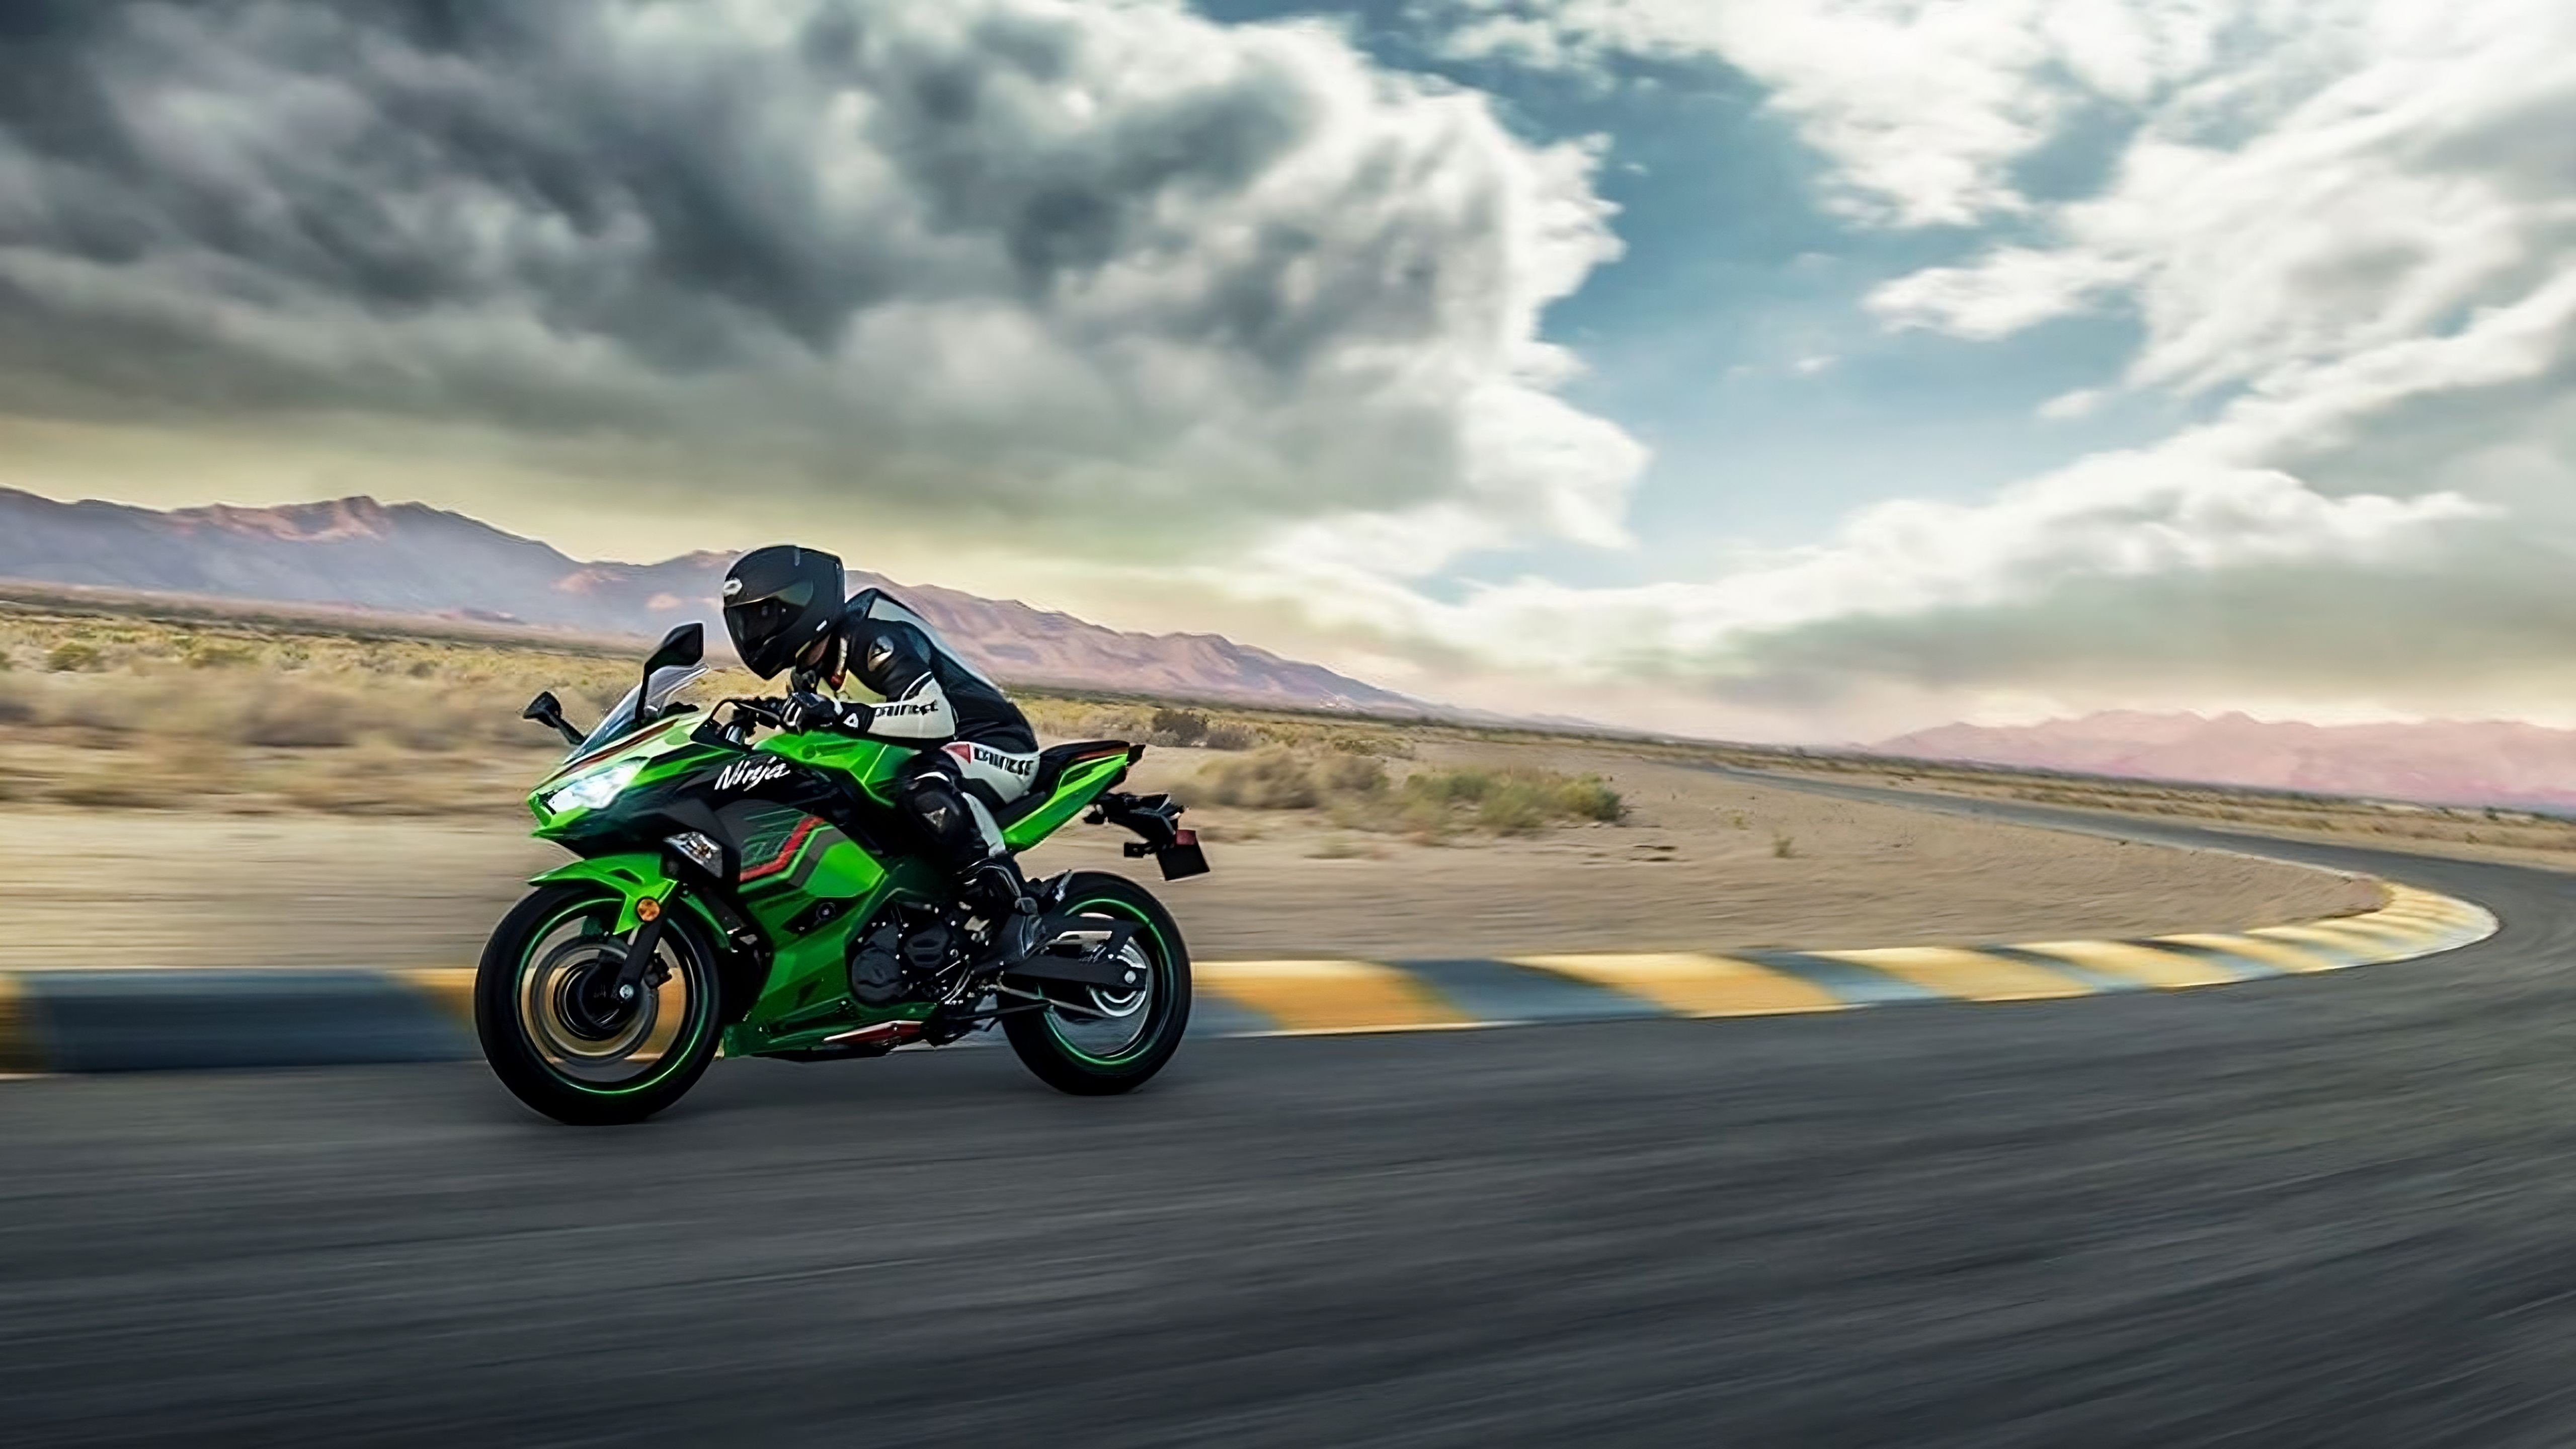 Kawasaki Ninja 400, Vulcan S and More Get Discounts of up to Rs 60,000 in March